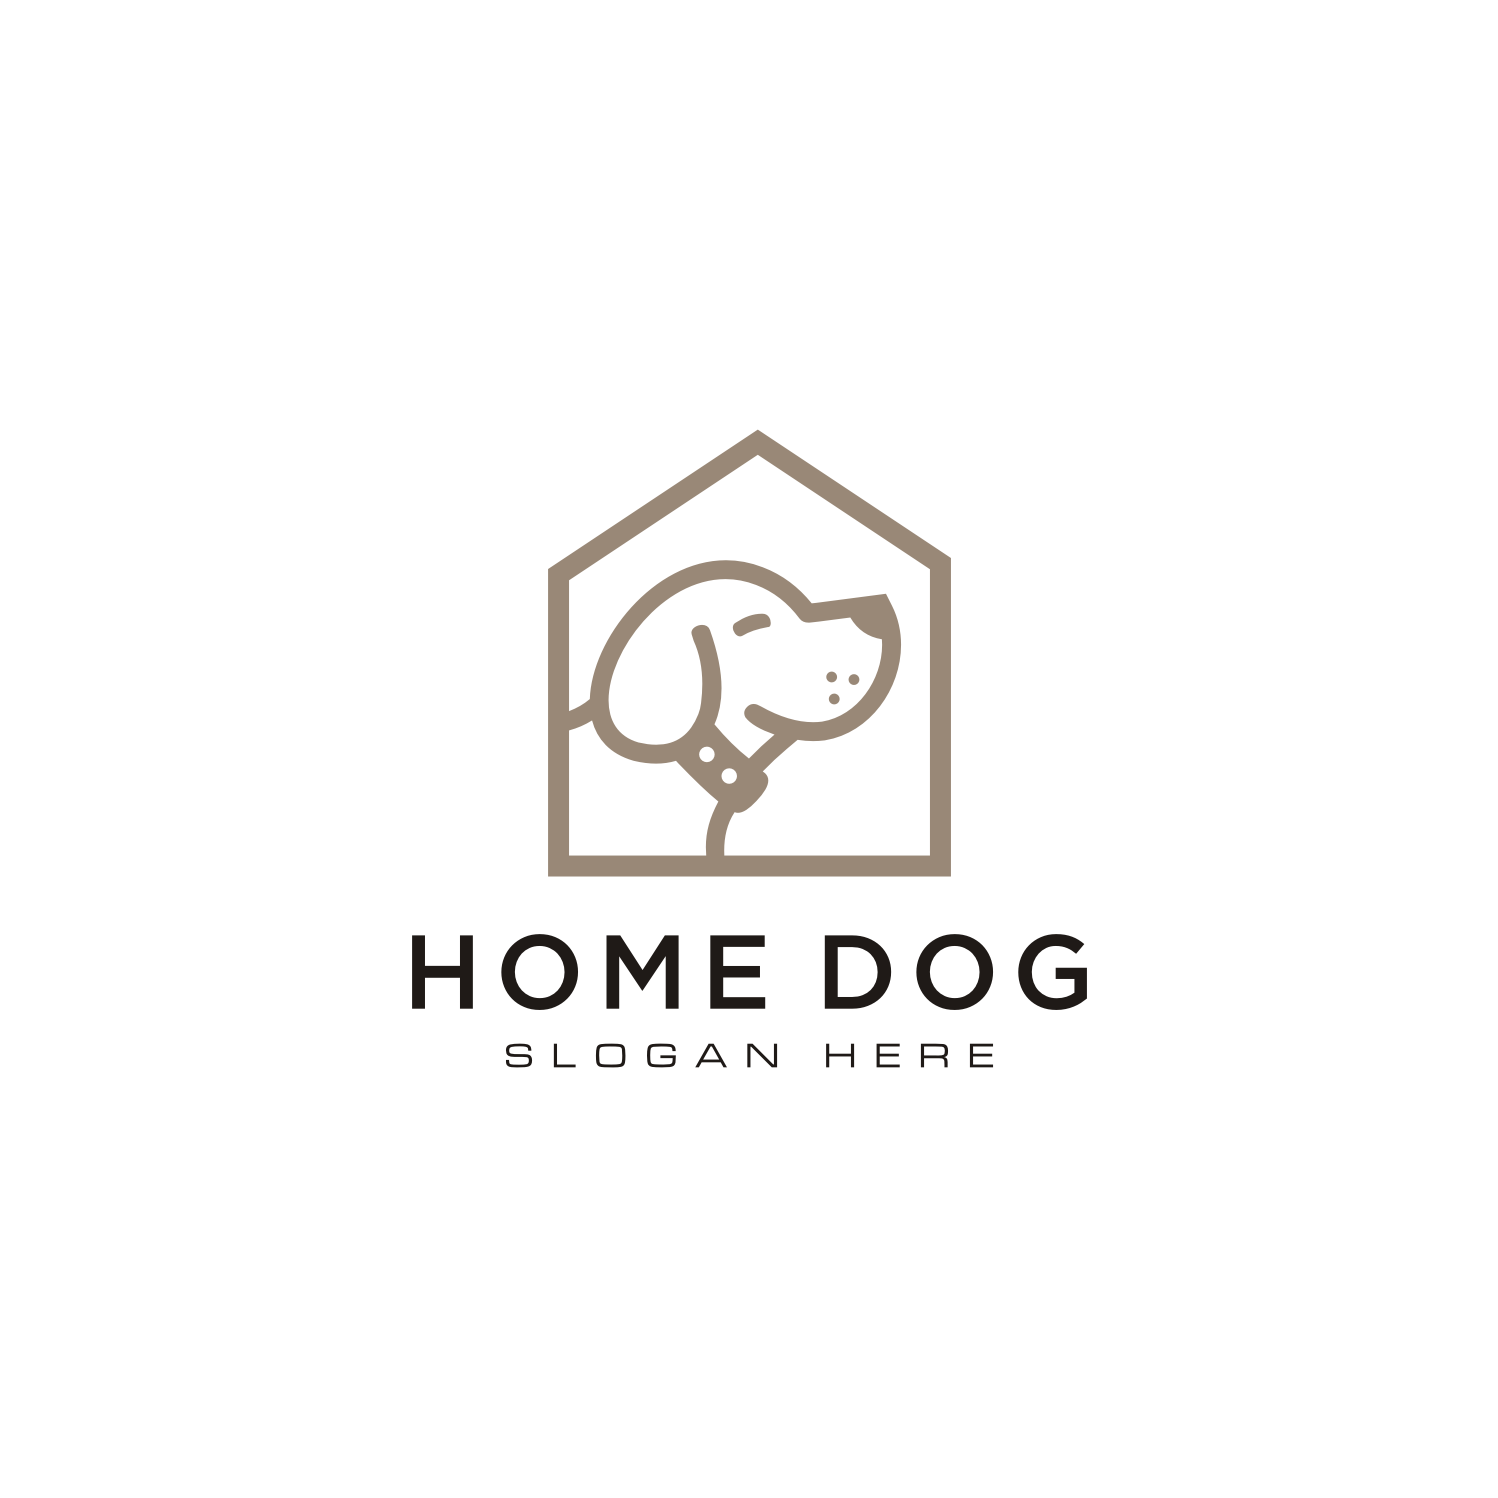 Dog House Logo with Line Style Pinterest preview.